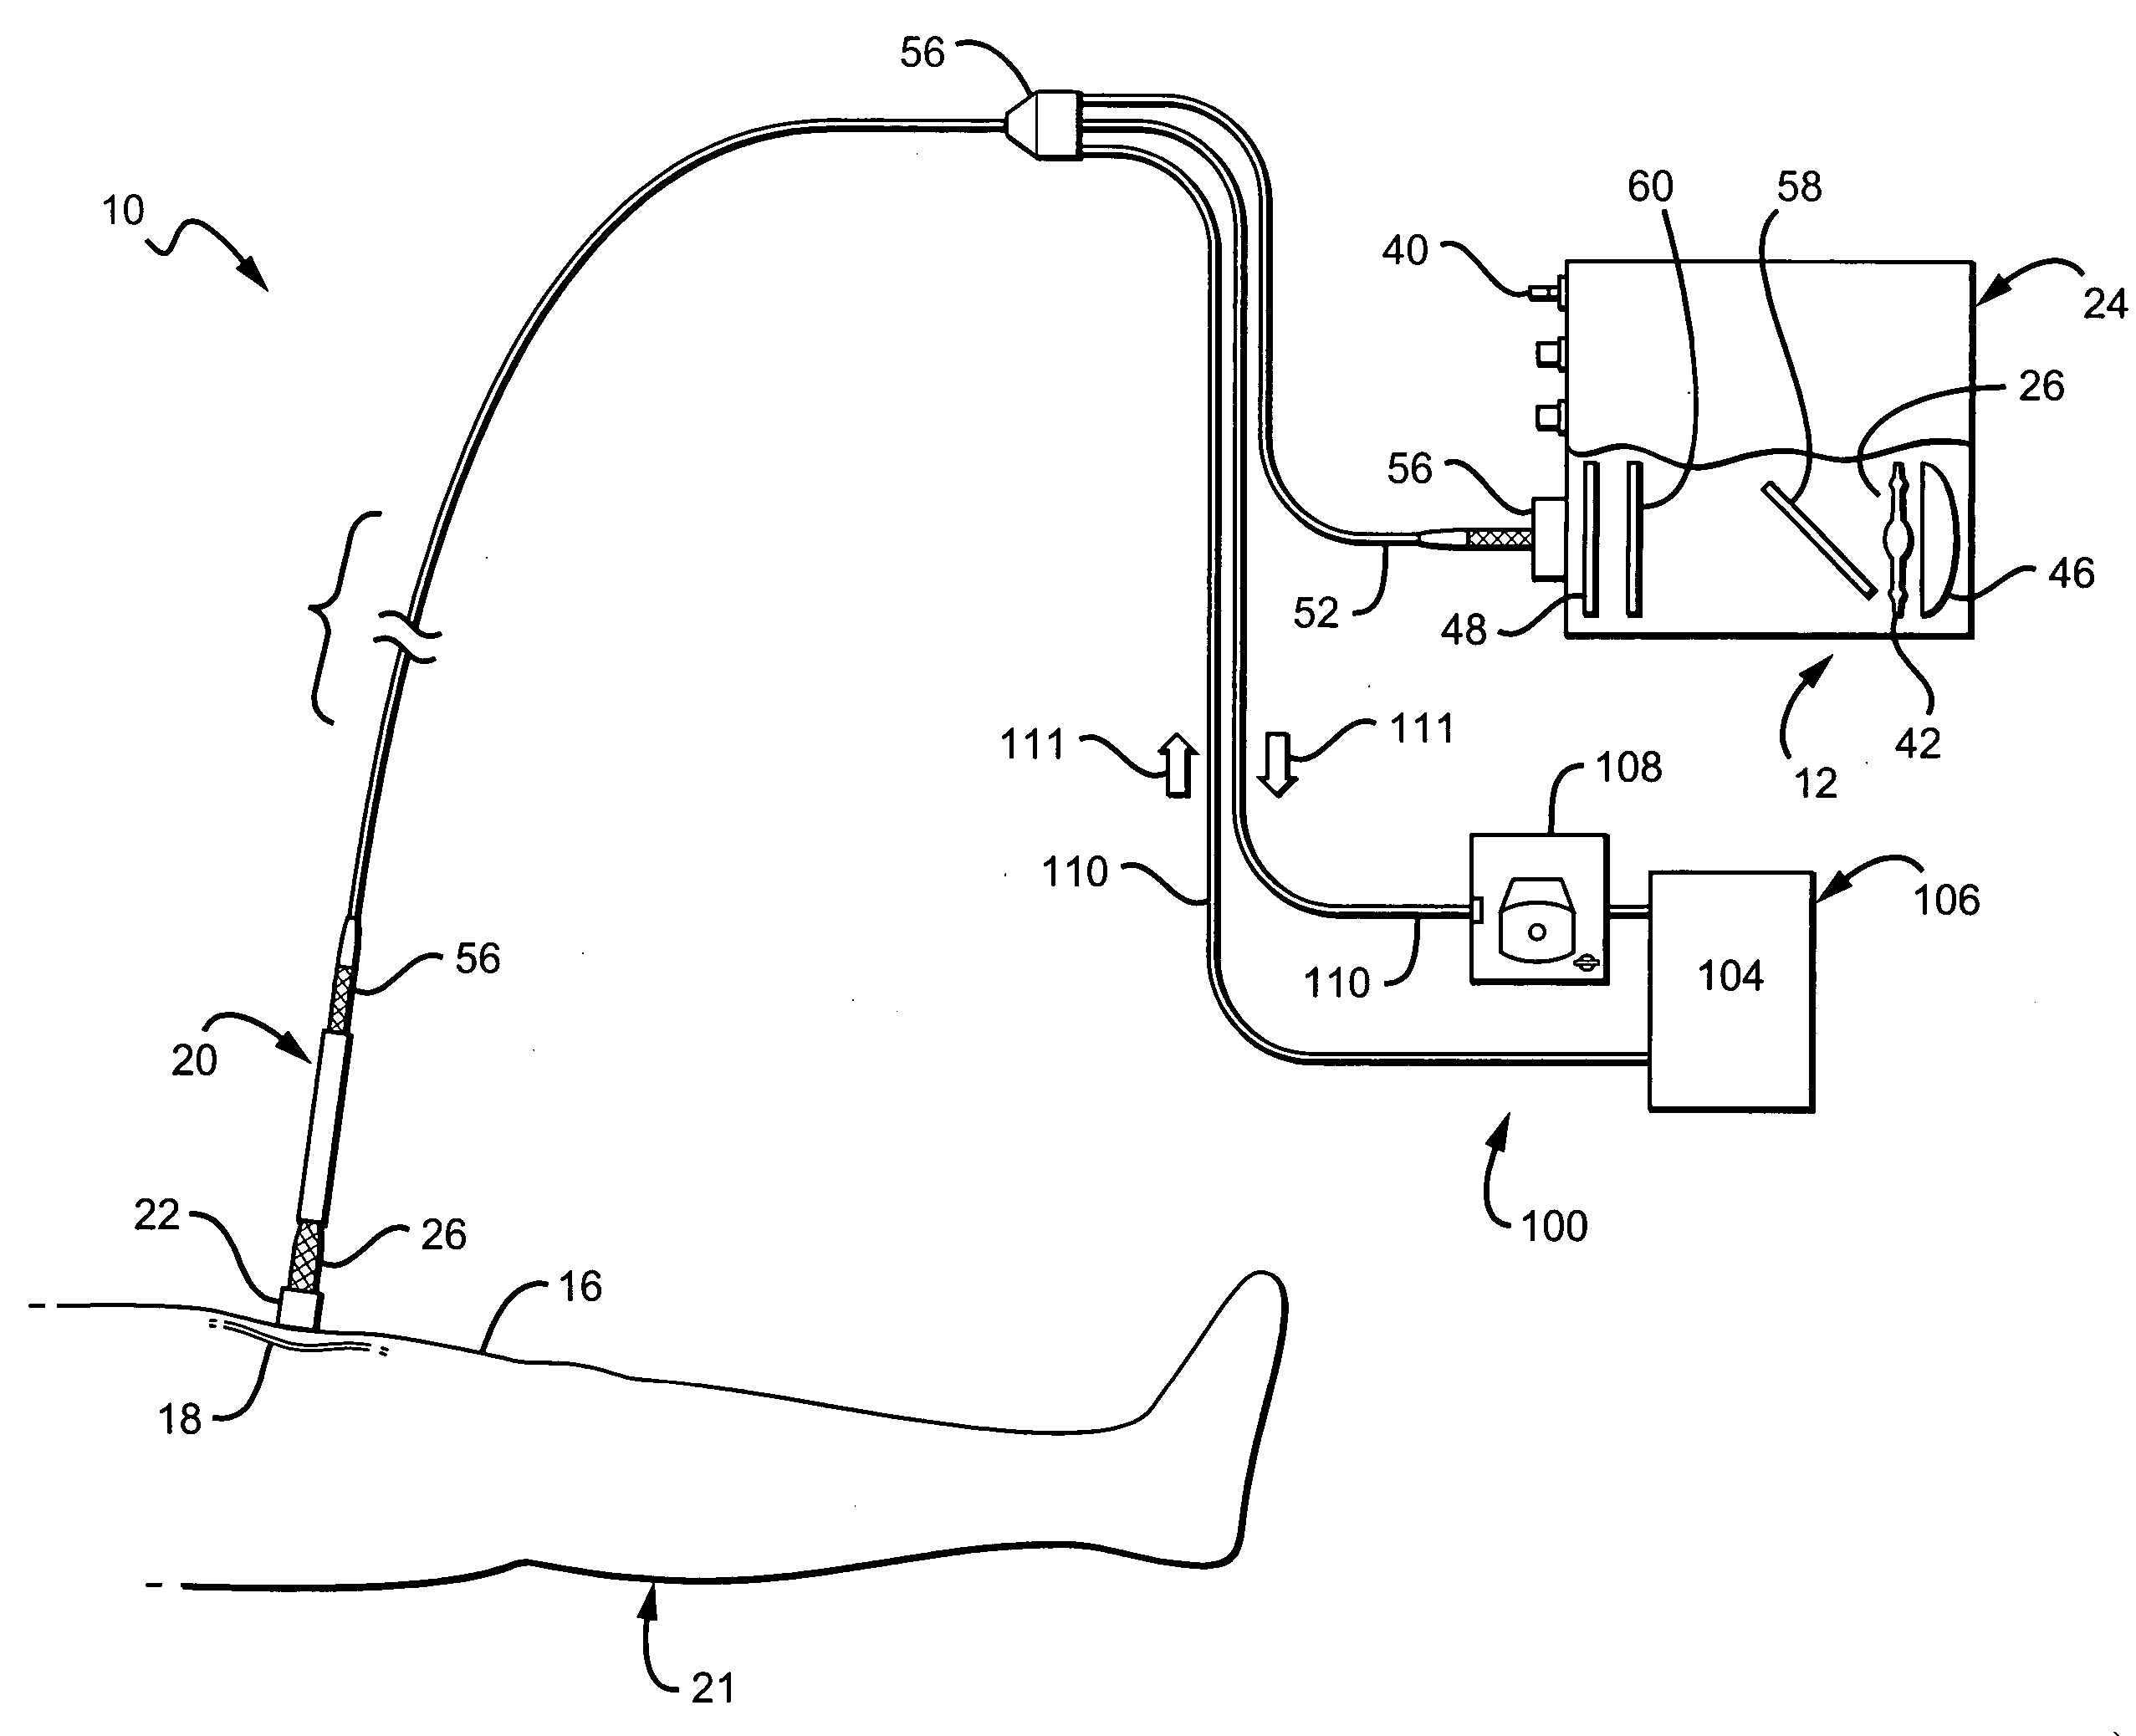 Vascular occlusion systems and methods